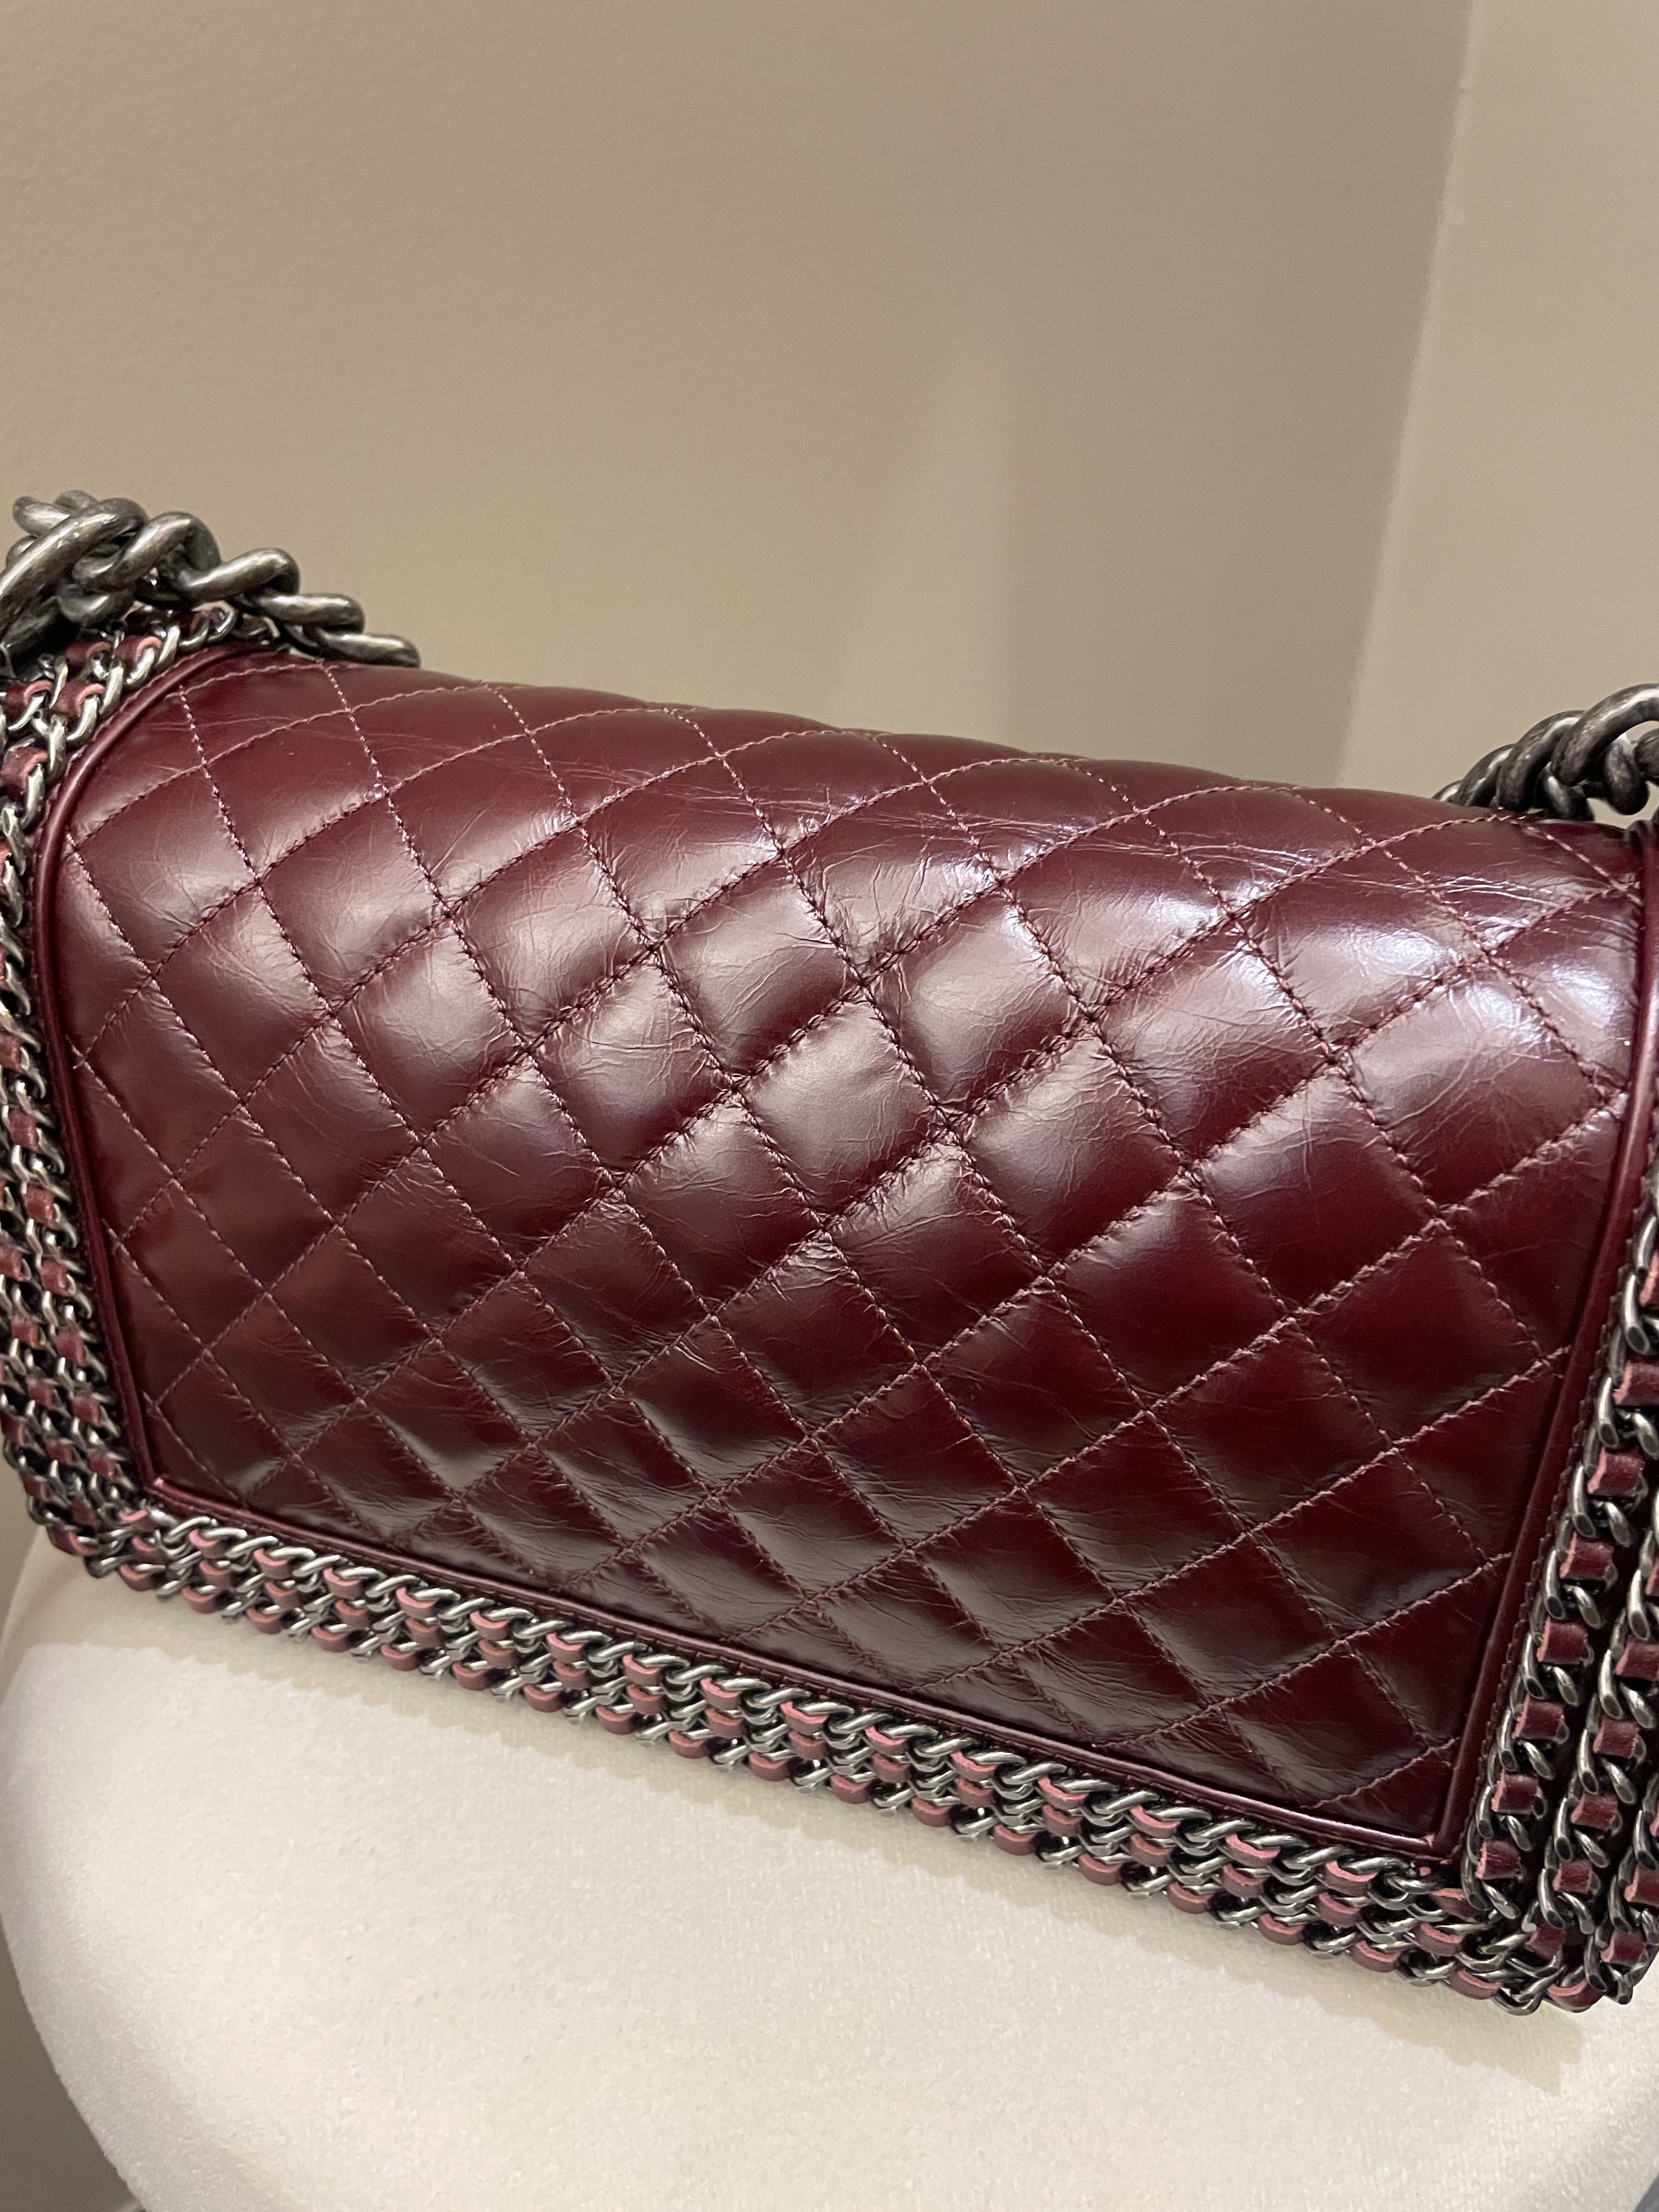 Chanel Quilted Old Medium Chained Boy Bag Burgundy Aged Calfskin